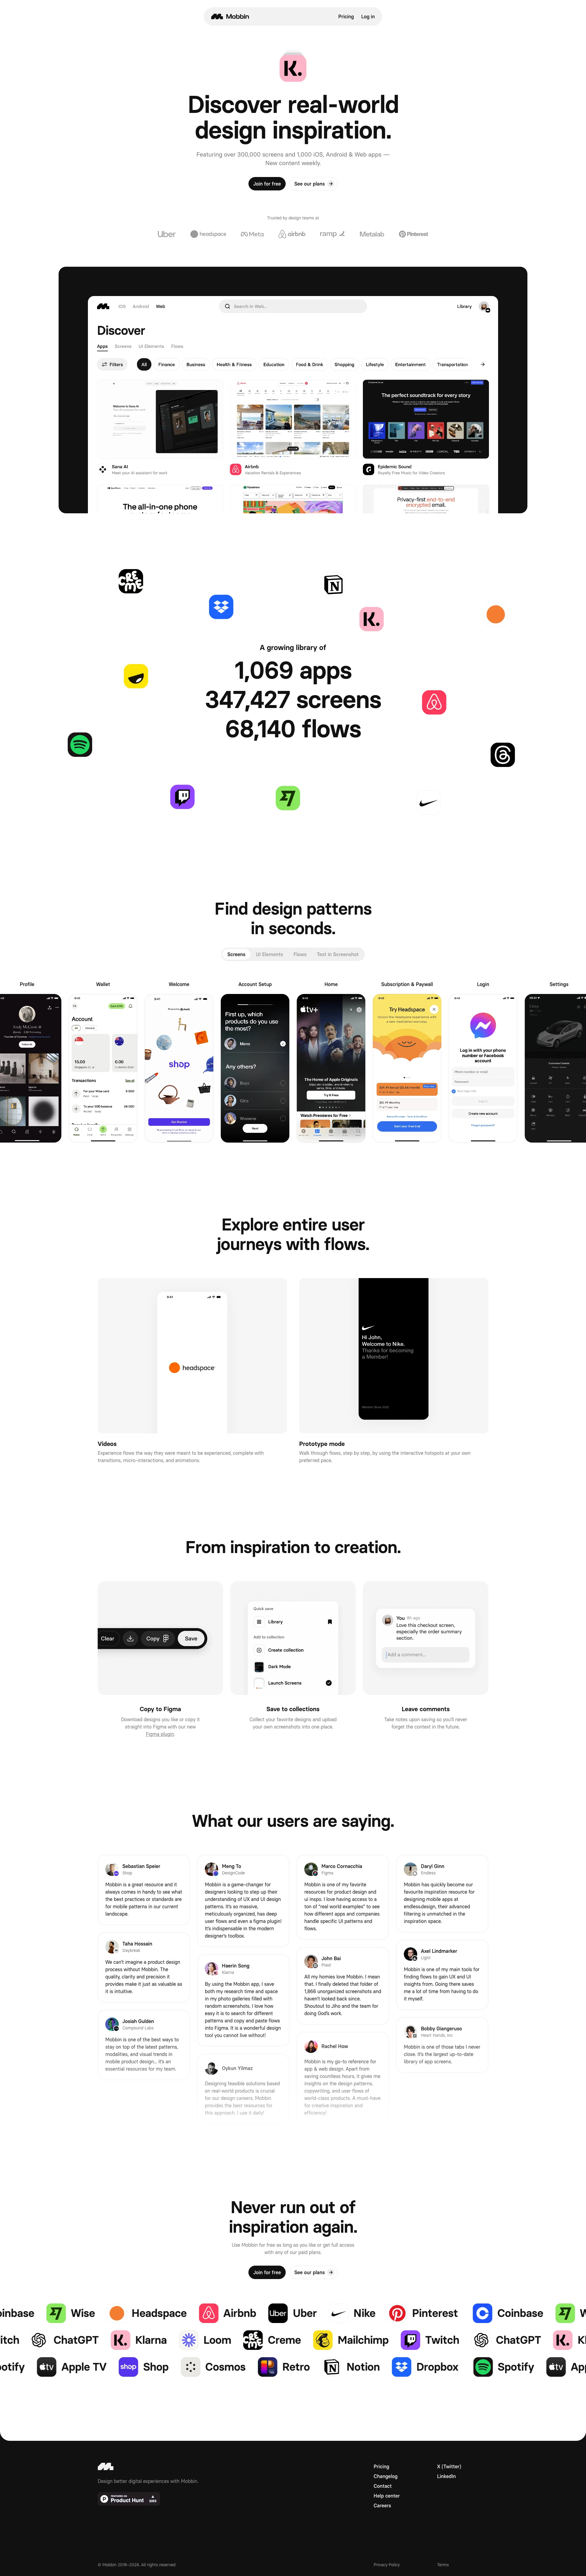 Mobbin Landing Page Example: Save hours of UI & UX research with our library of 300,000+ fully searchable mobile & web app screenshots.